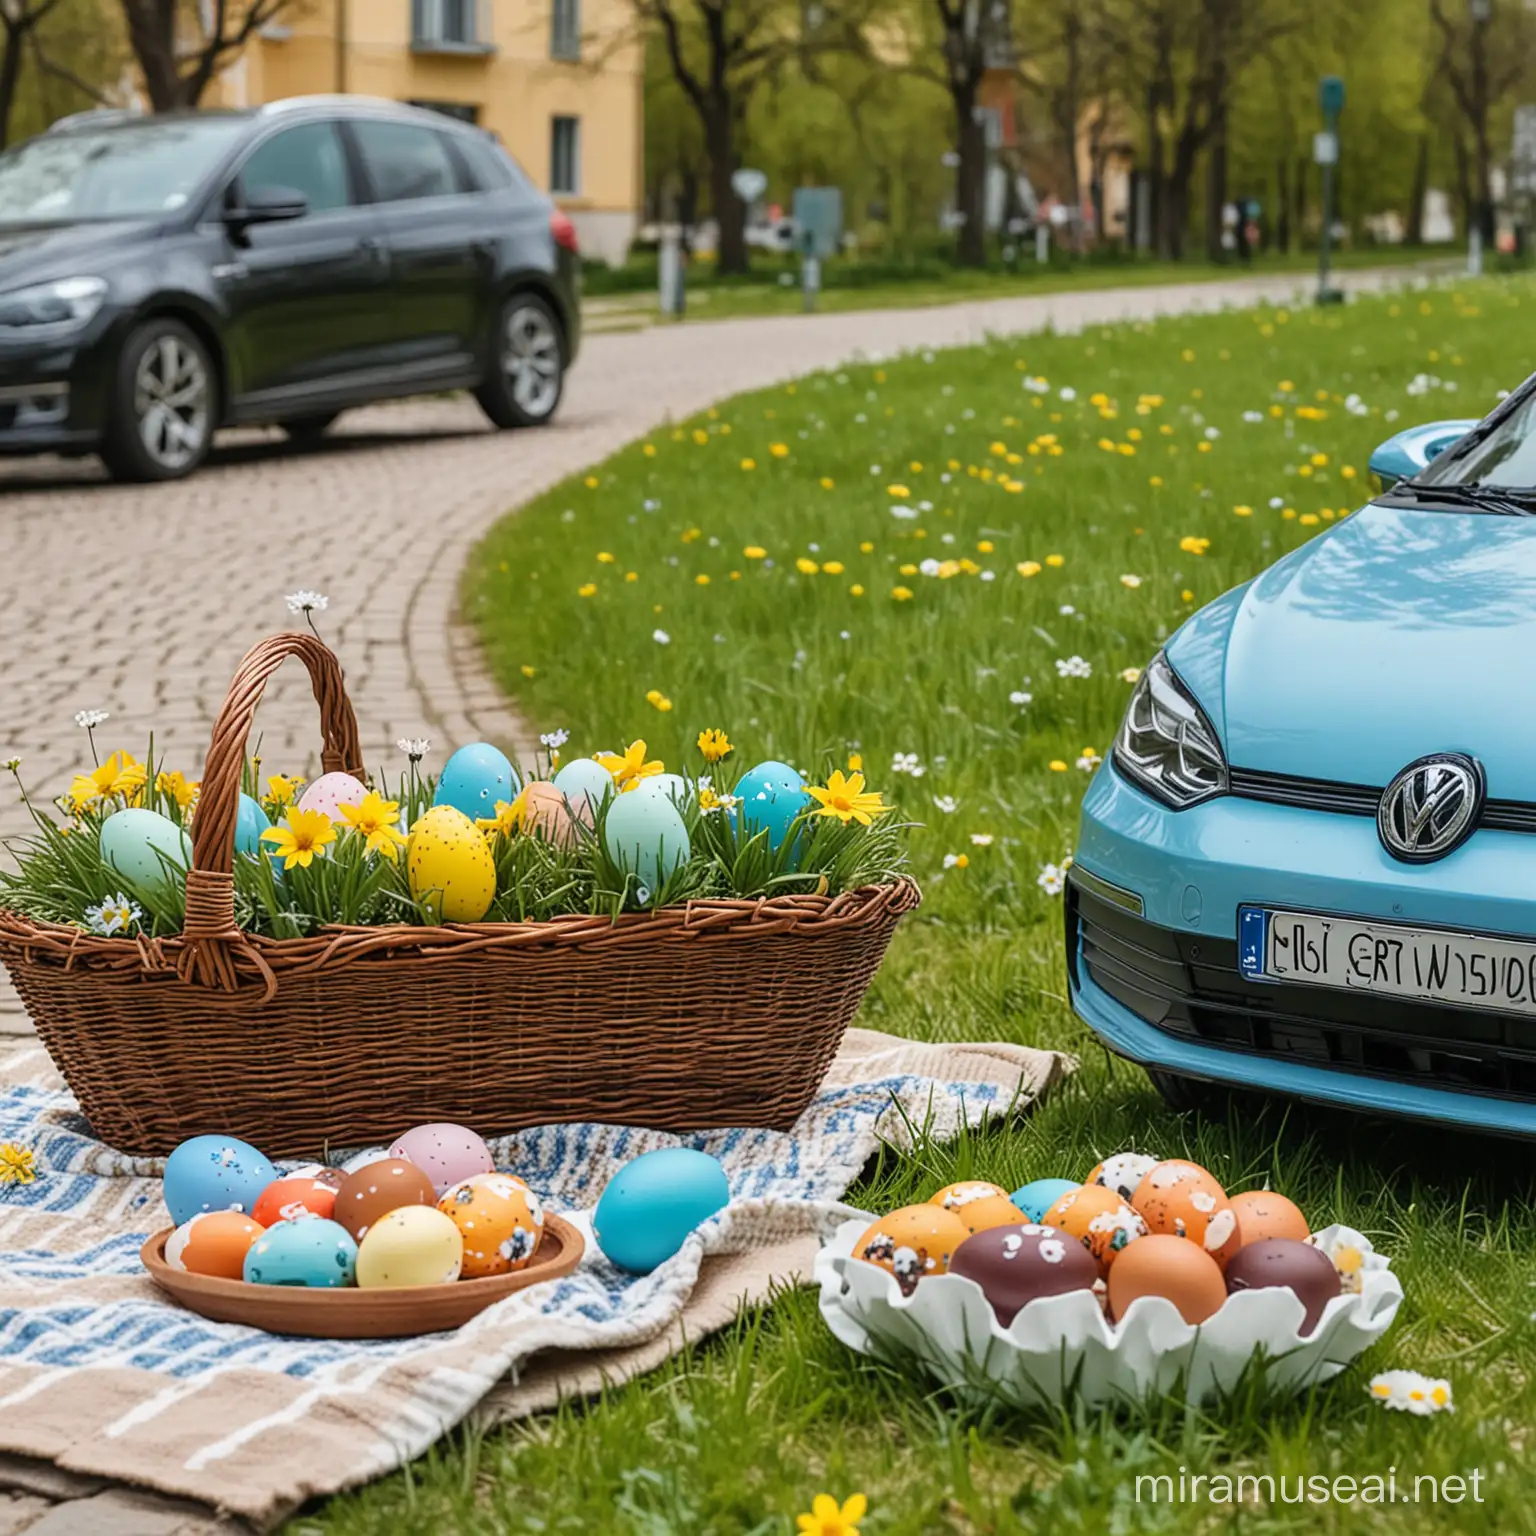 A beautiful spring day in the University Park in Vilnius, Lithuania. Close-up of Easter eggs in a basket and a cut piece of Easter cake, and Easter food on a plate on a blanket on a green meadow with spring flowers. An electric vehicle charging station in the driveway in the distance. A blue electric VW ID.4 parked behind the charging station. University buildings can be seen in the background.